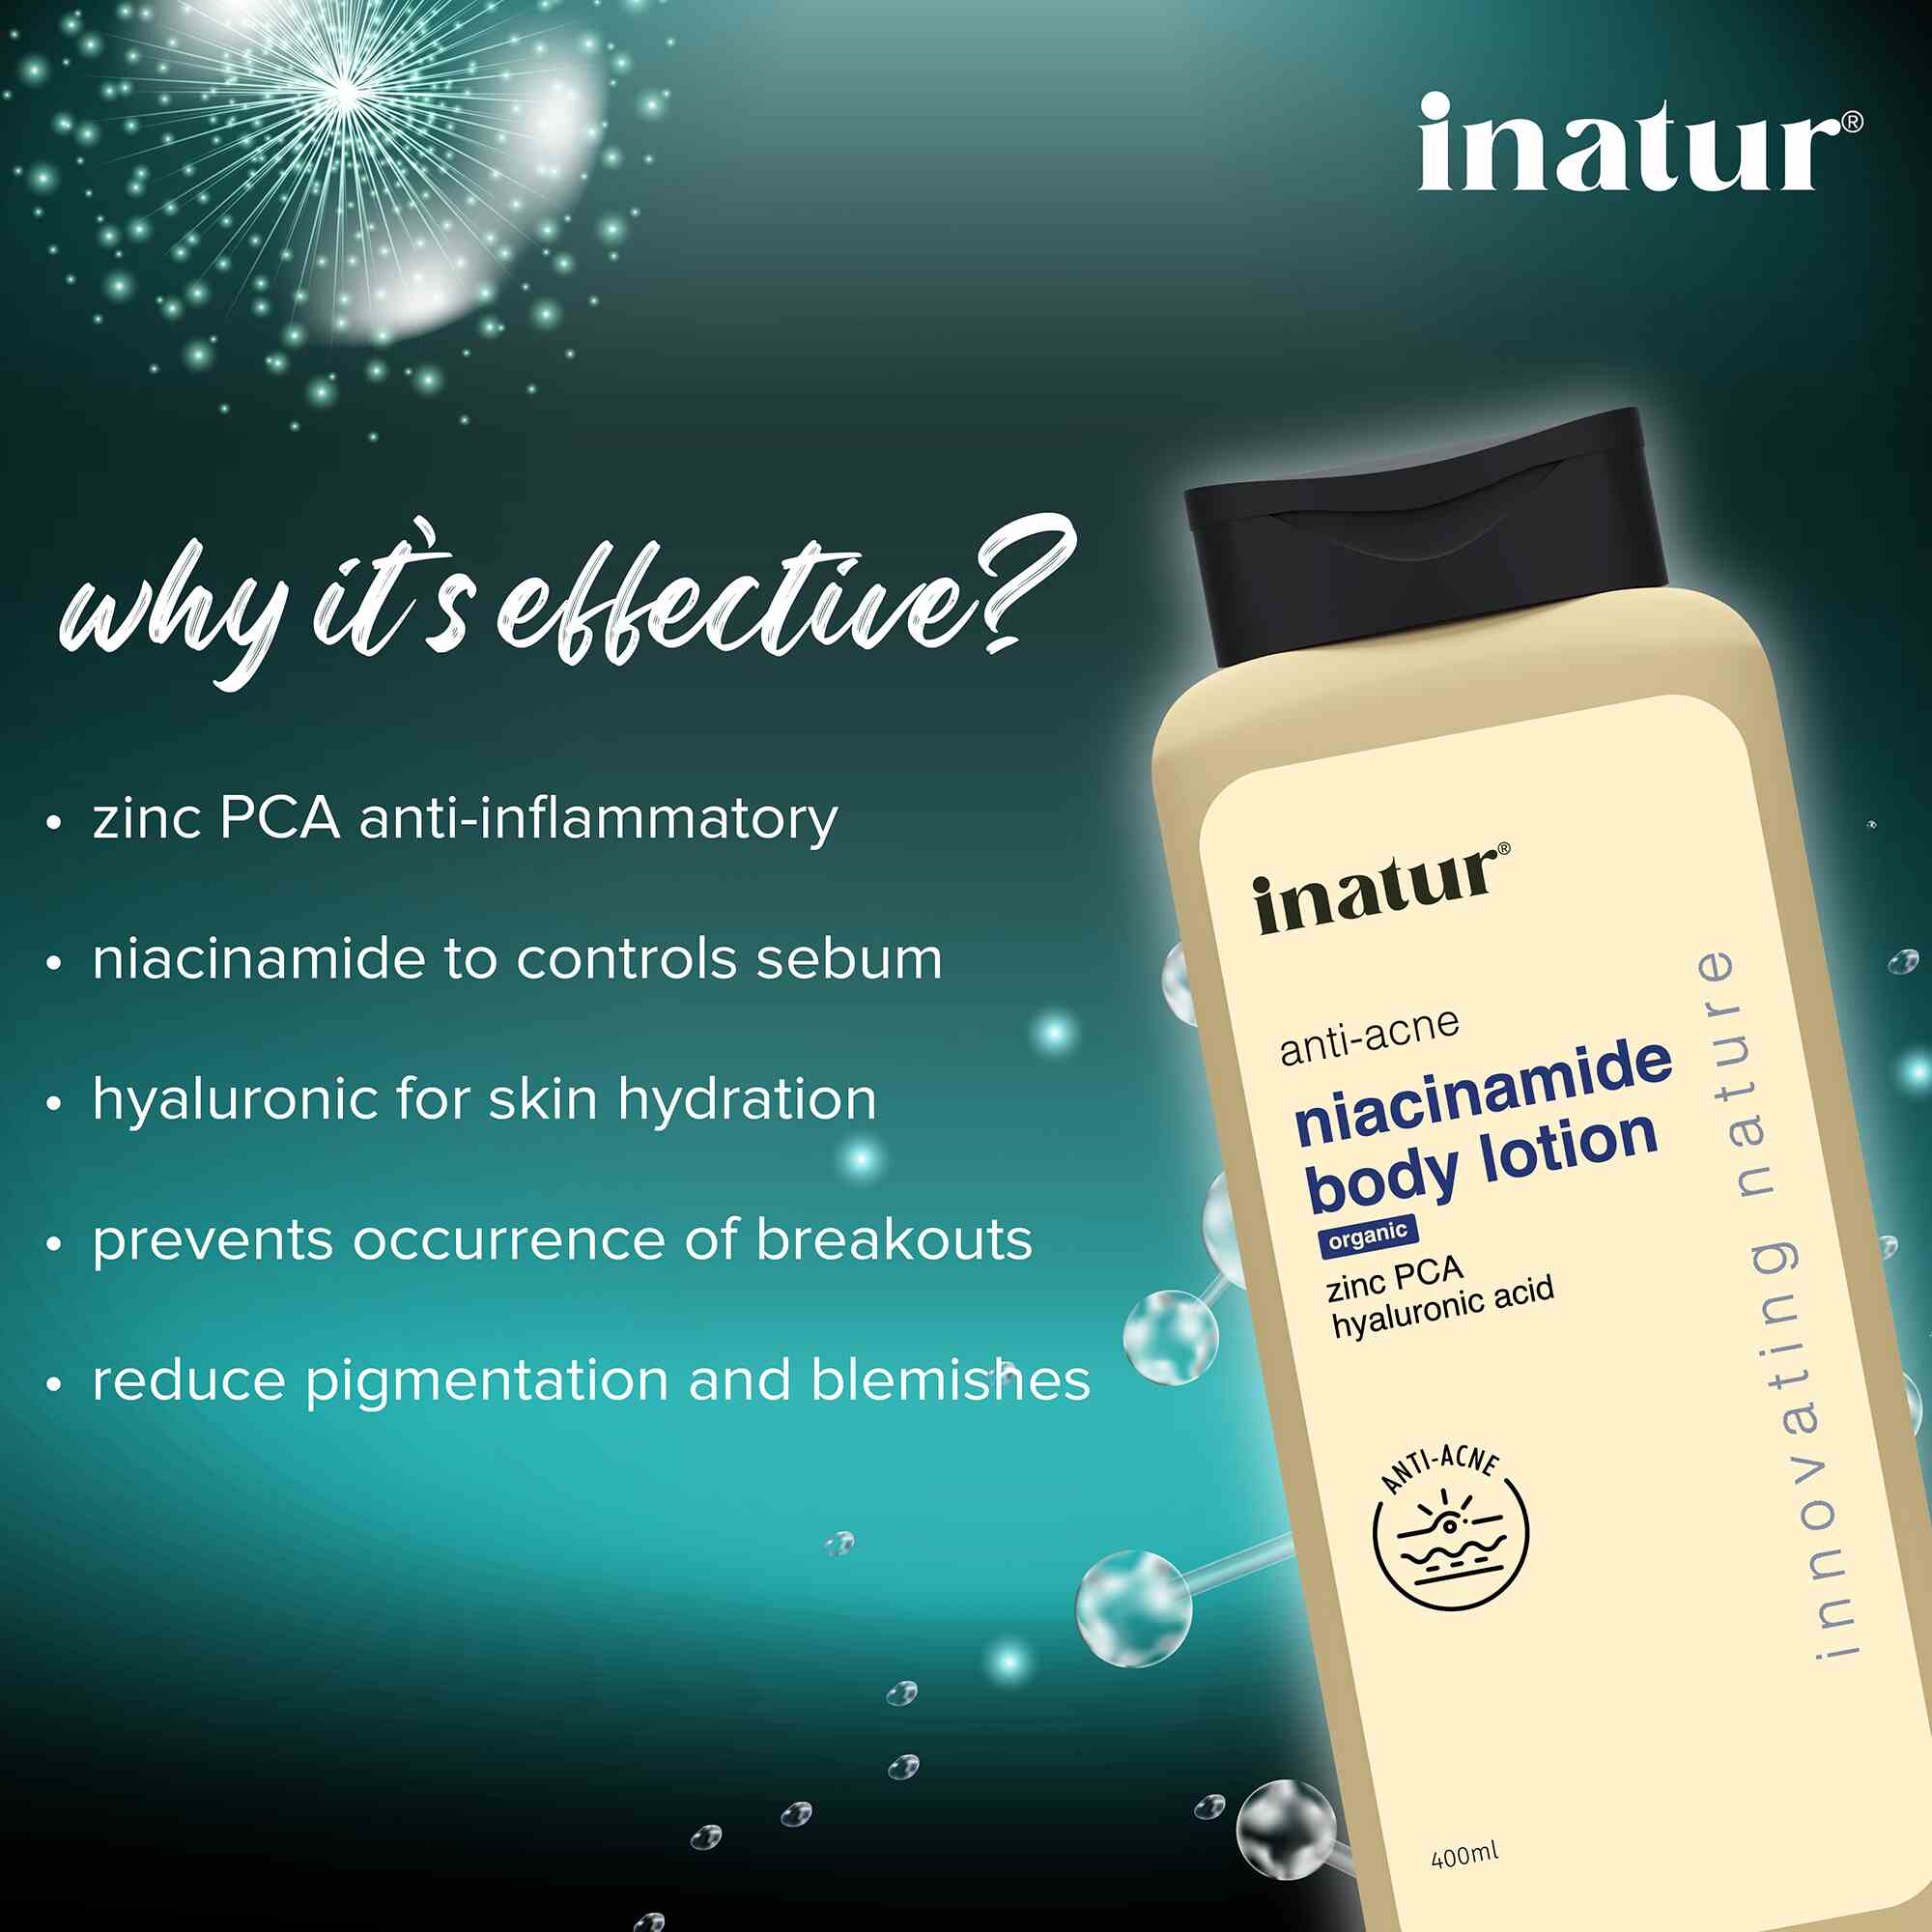 why inatur niacinamide body lotion is effective